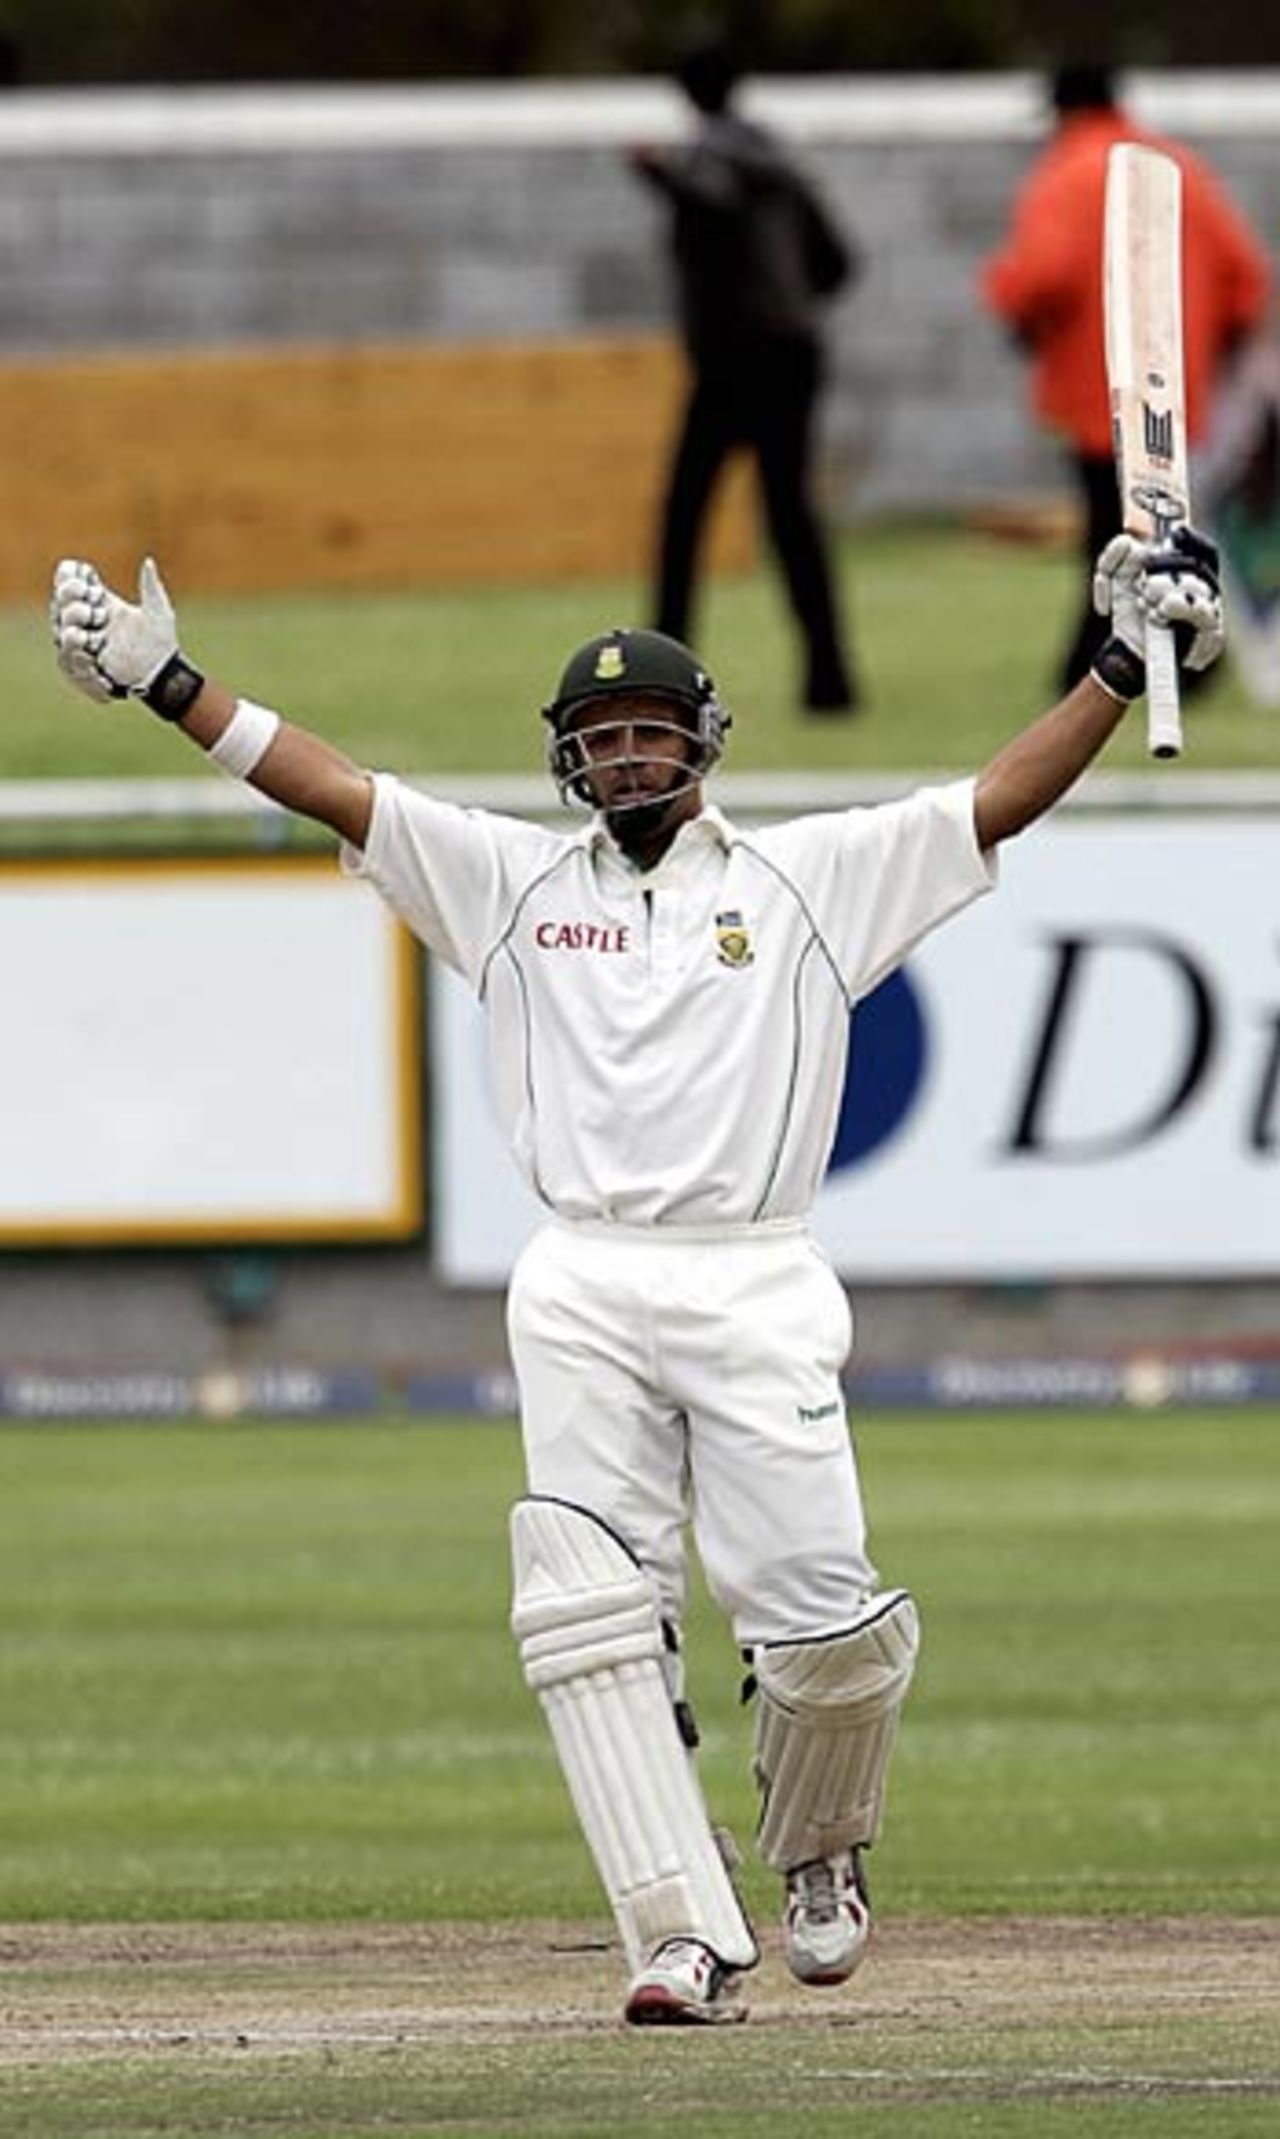 Ashwell Prince celebrates his century on the final day, South Africa v New Zealand, 2nd Test, Cape Town, May 1, 2006
